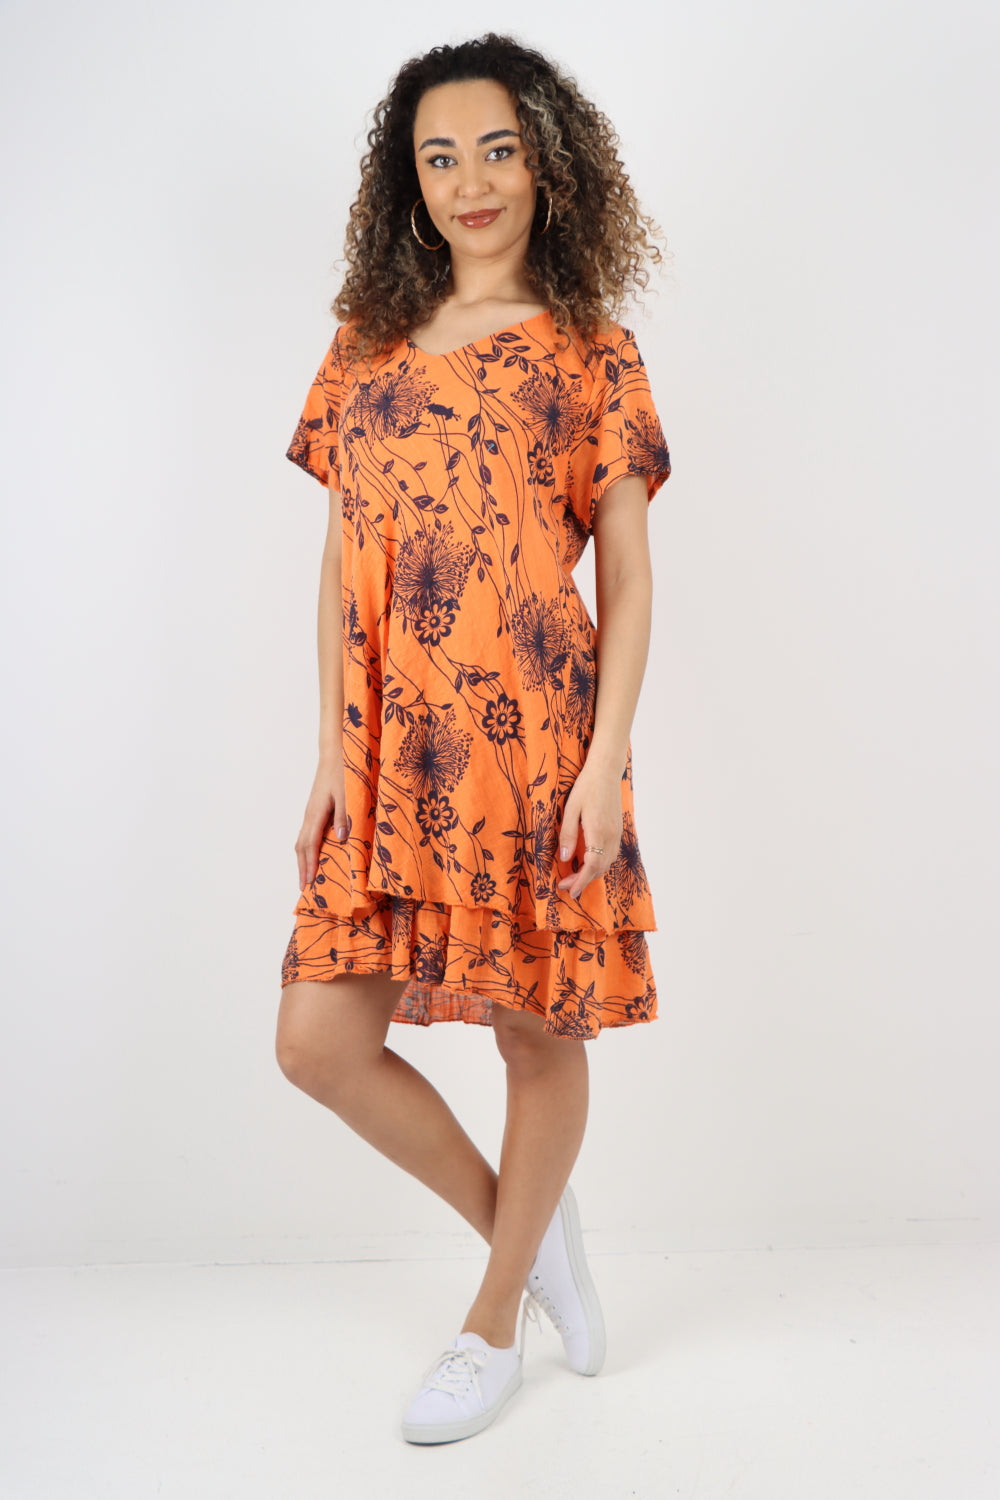 Double Layer Floral Print  Short Sleeve Dress